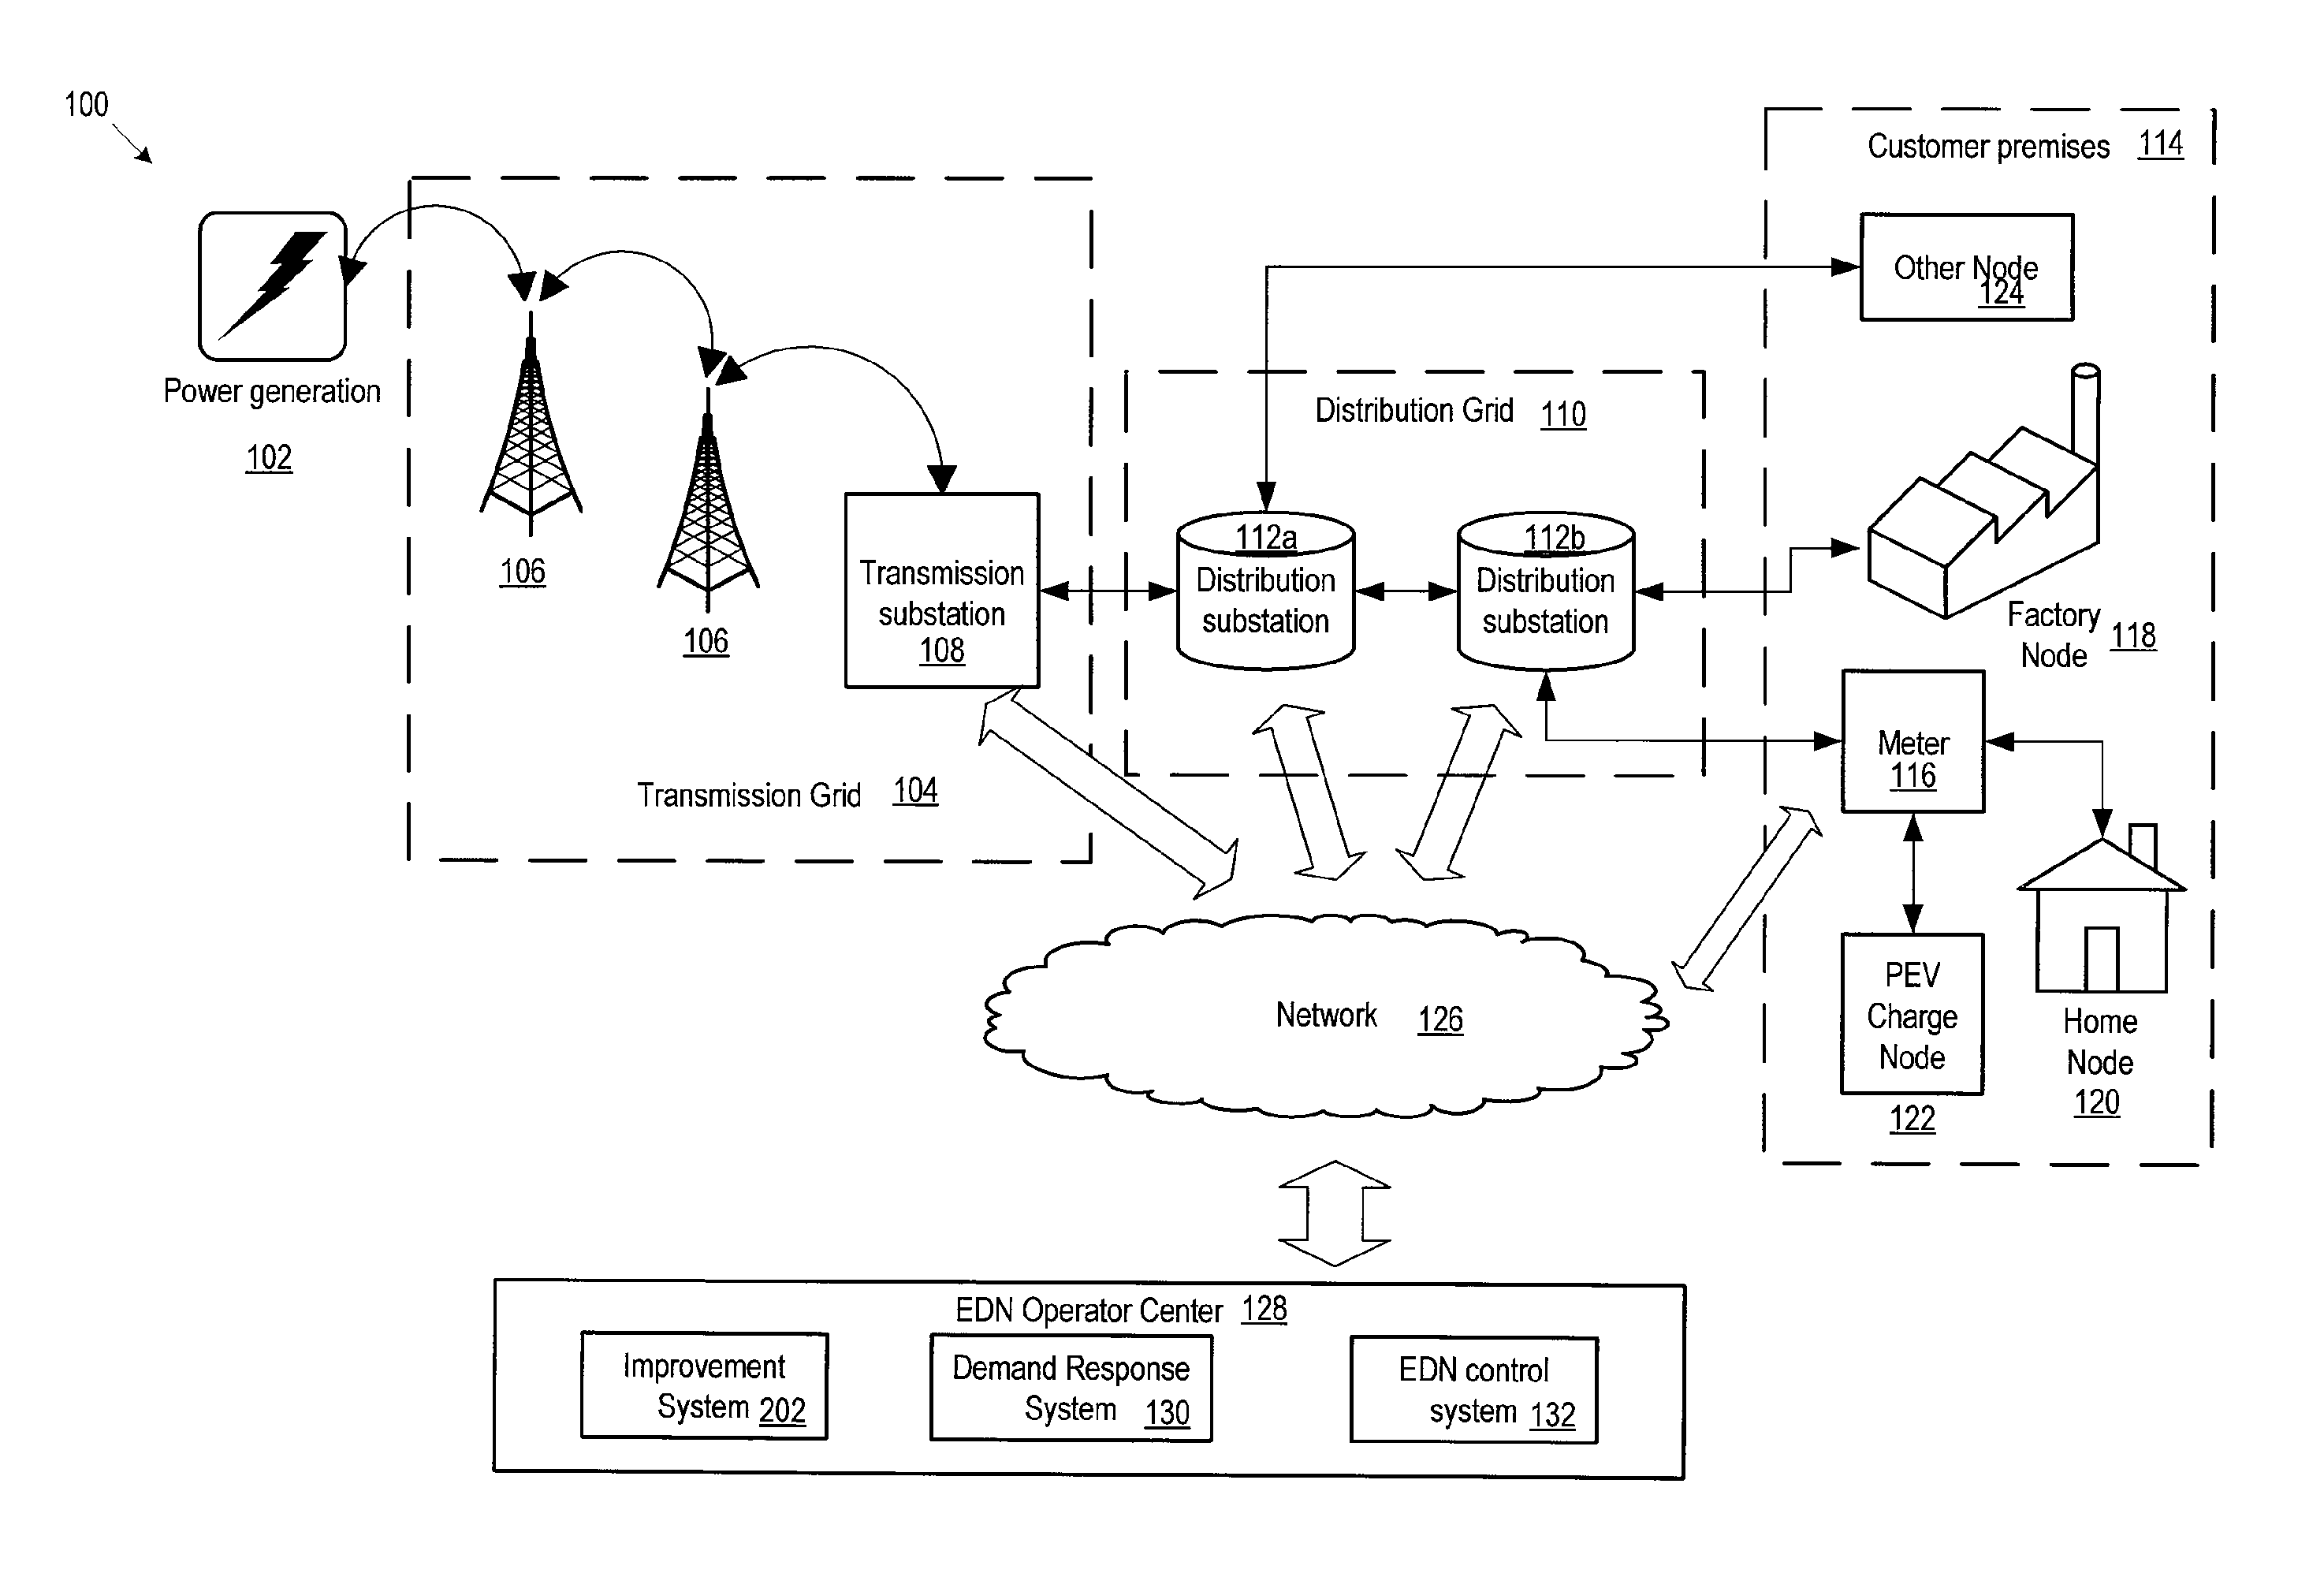 Electrical distribution network improvement for plug-in electric vehicles